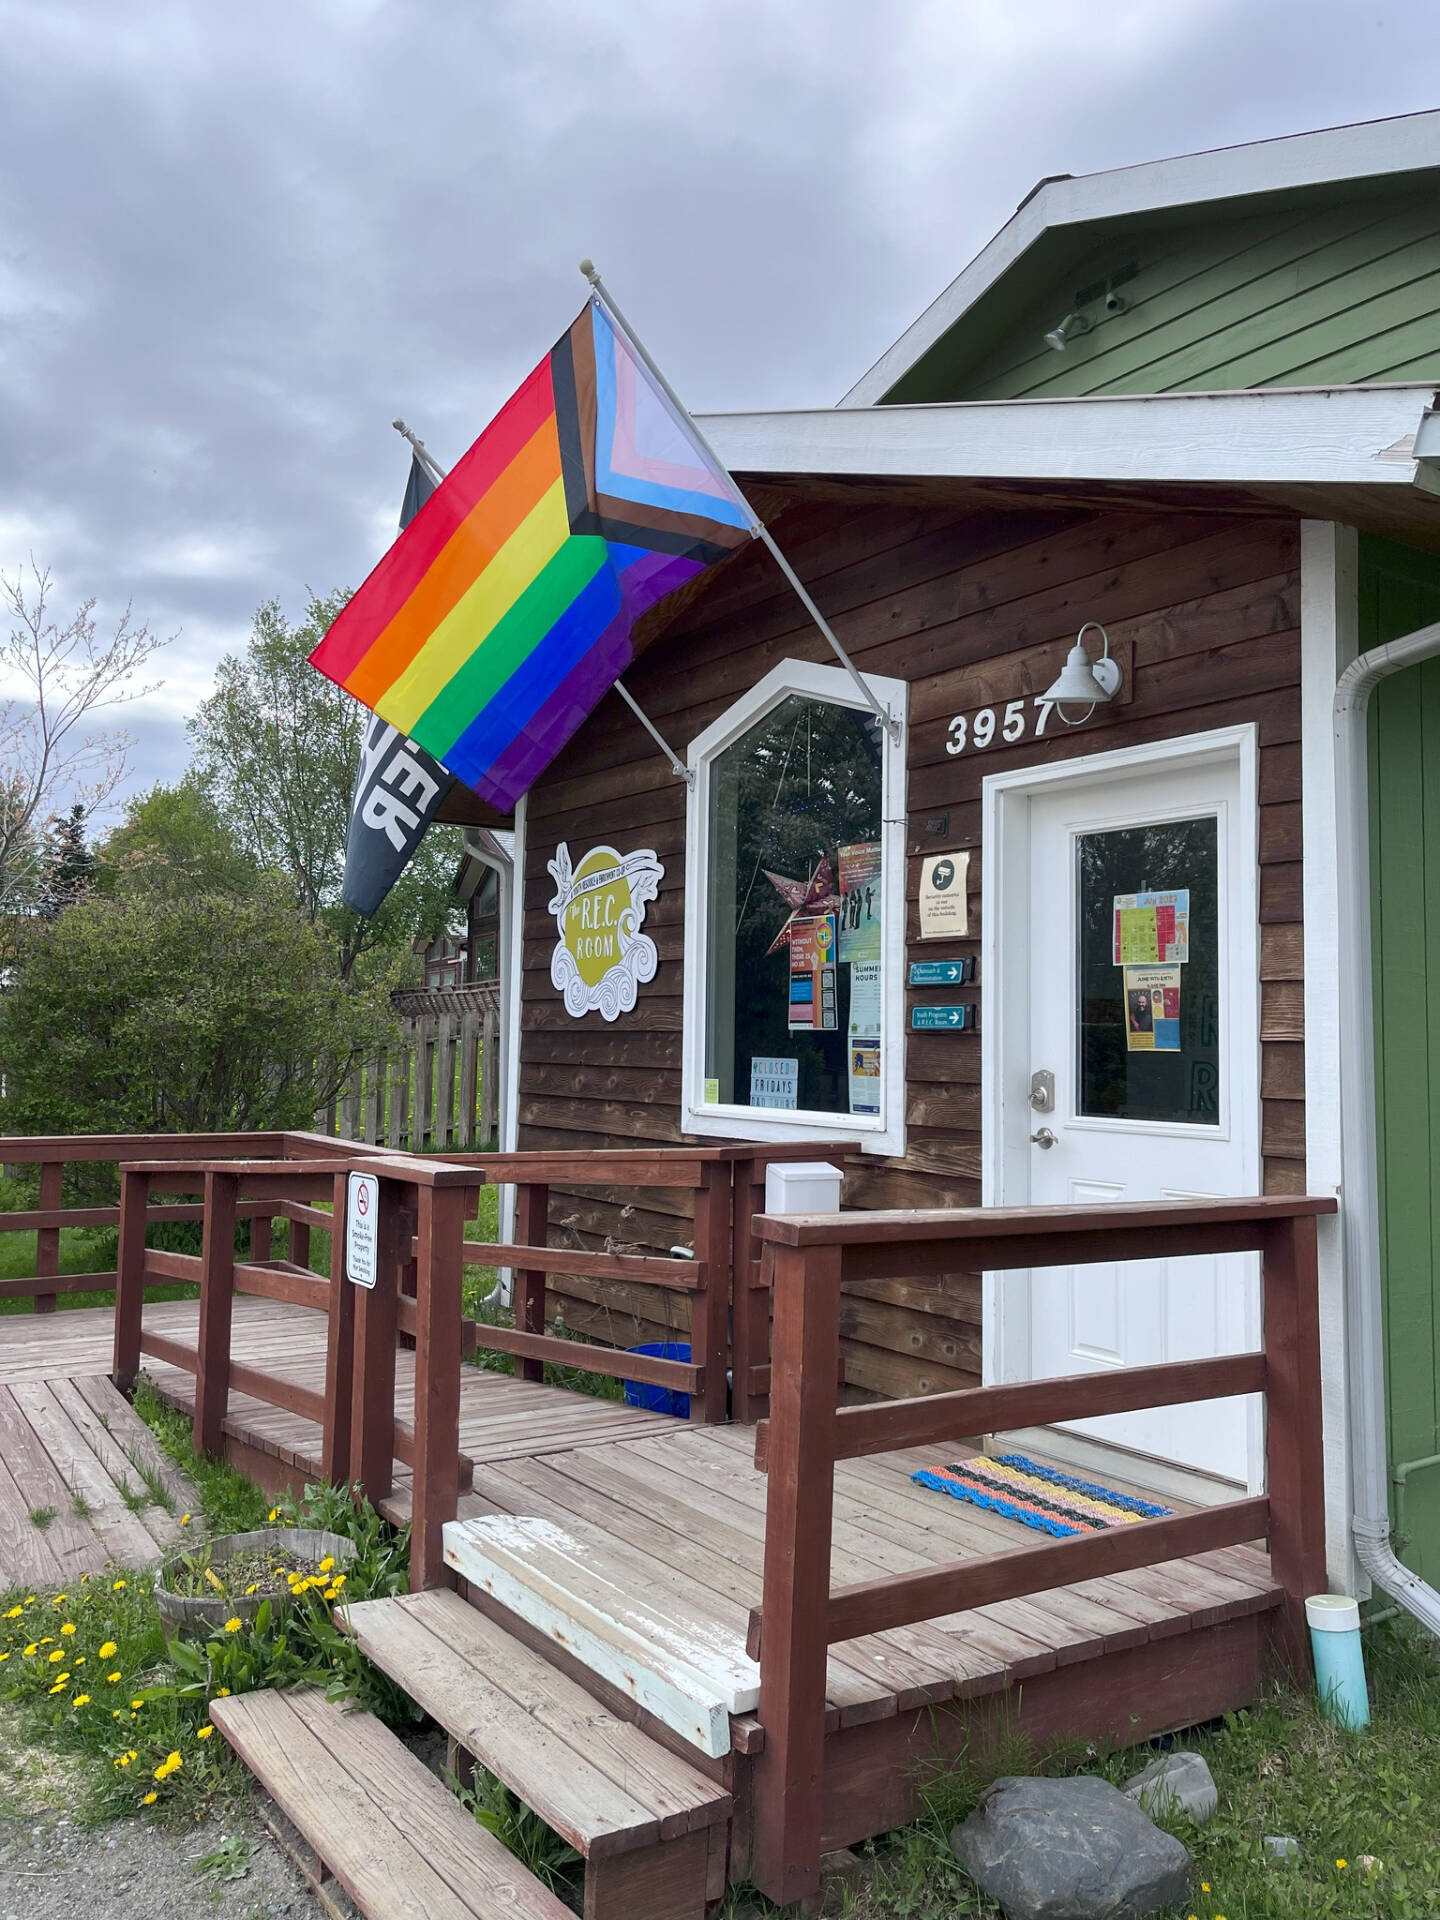 The newly-replaced Pride flags hang in front of the REC Room entrance in June 2023 in Homer, Alaska. Photo by the REC Room